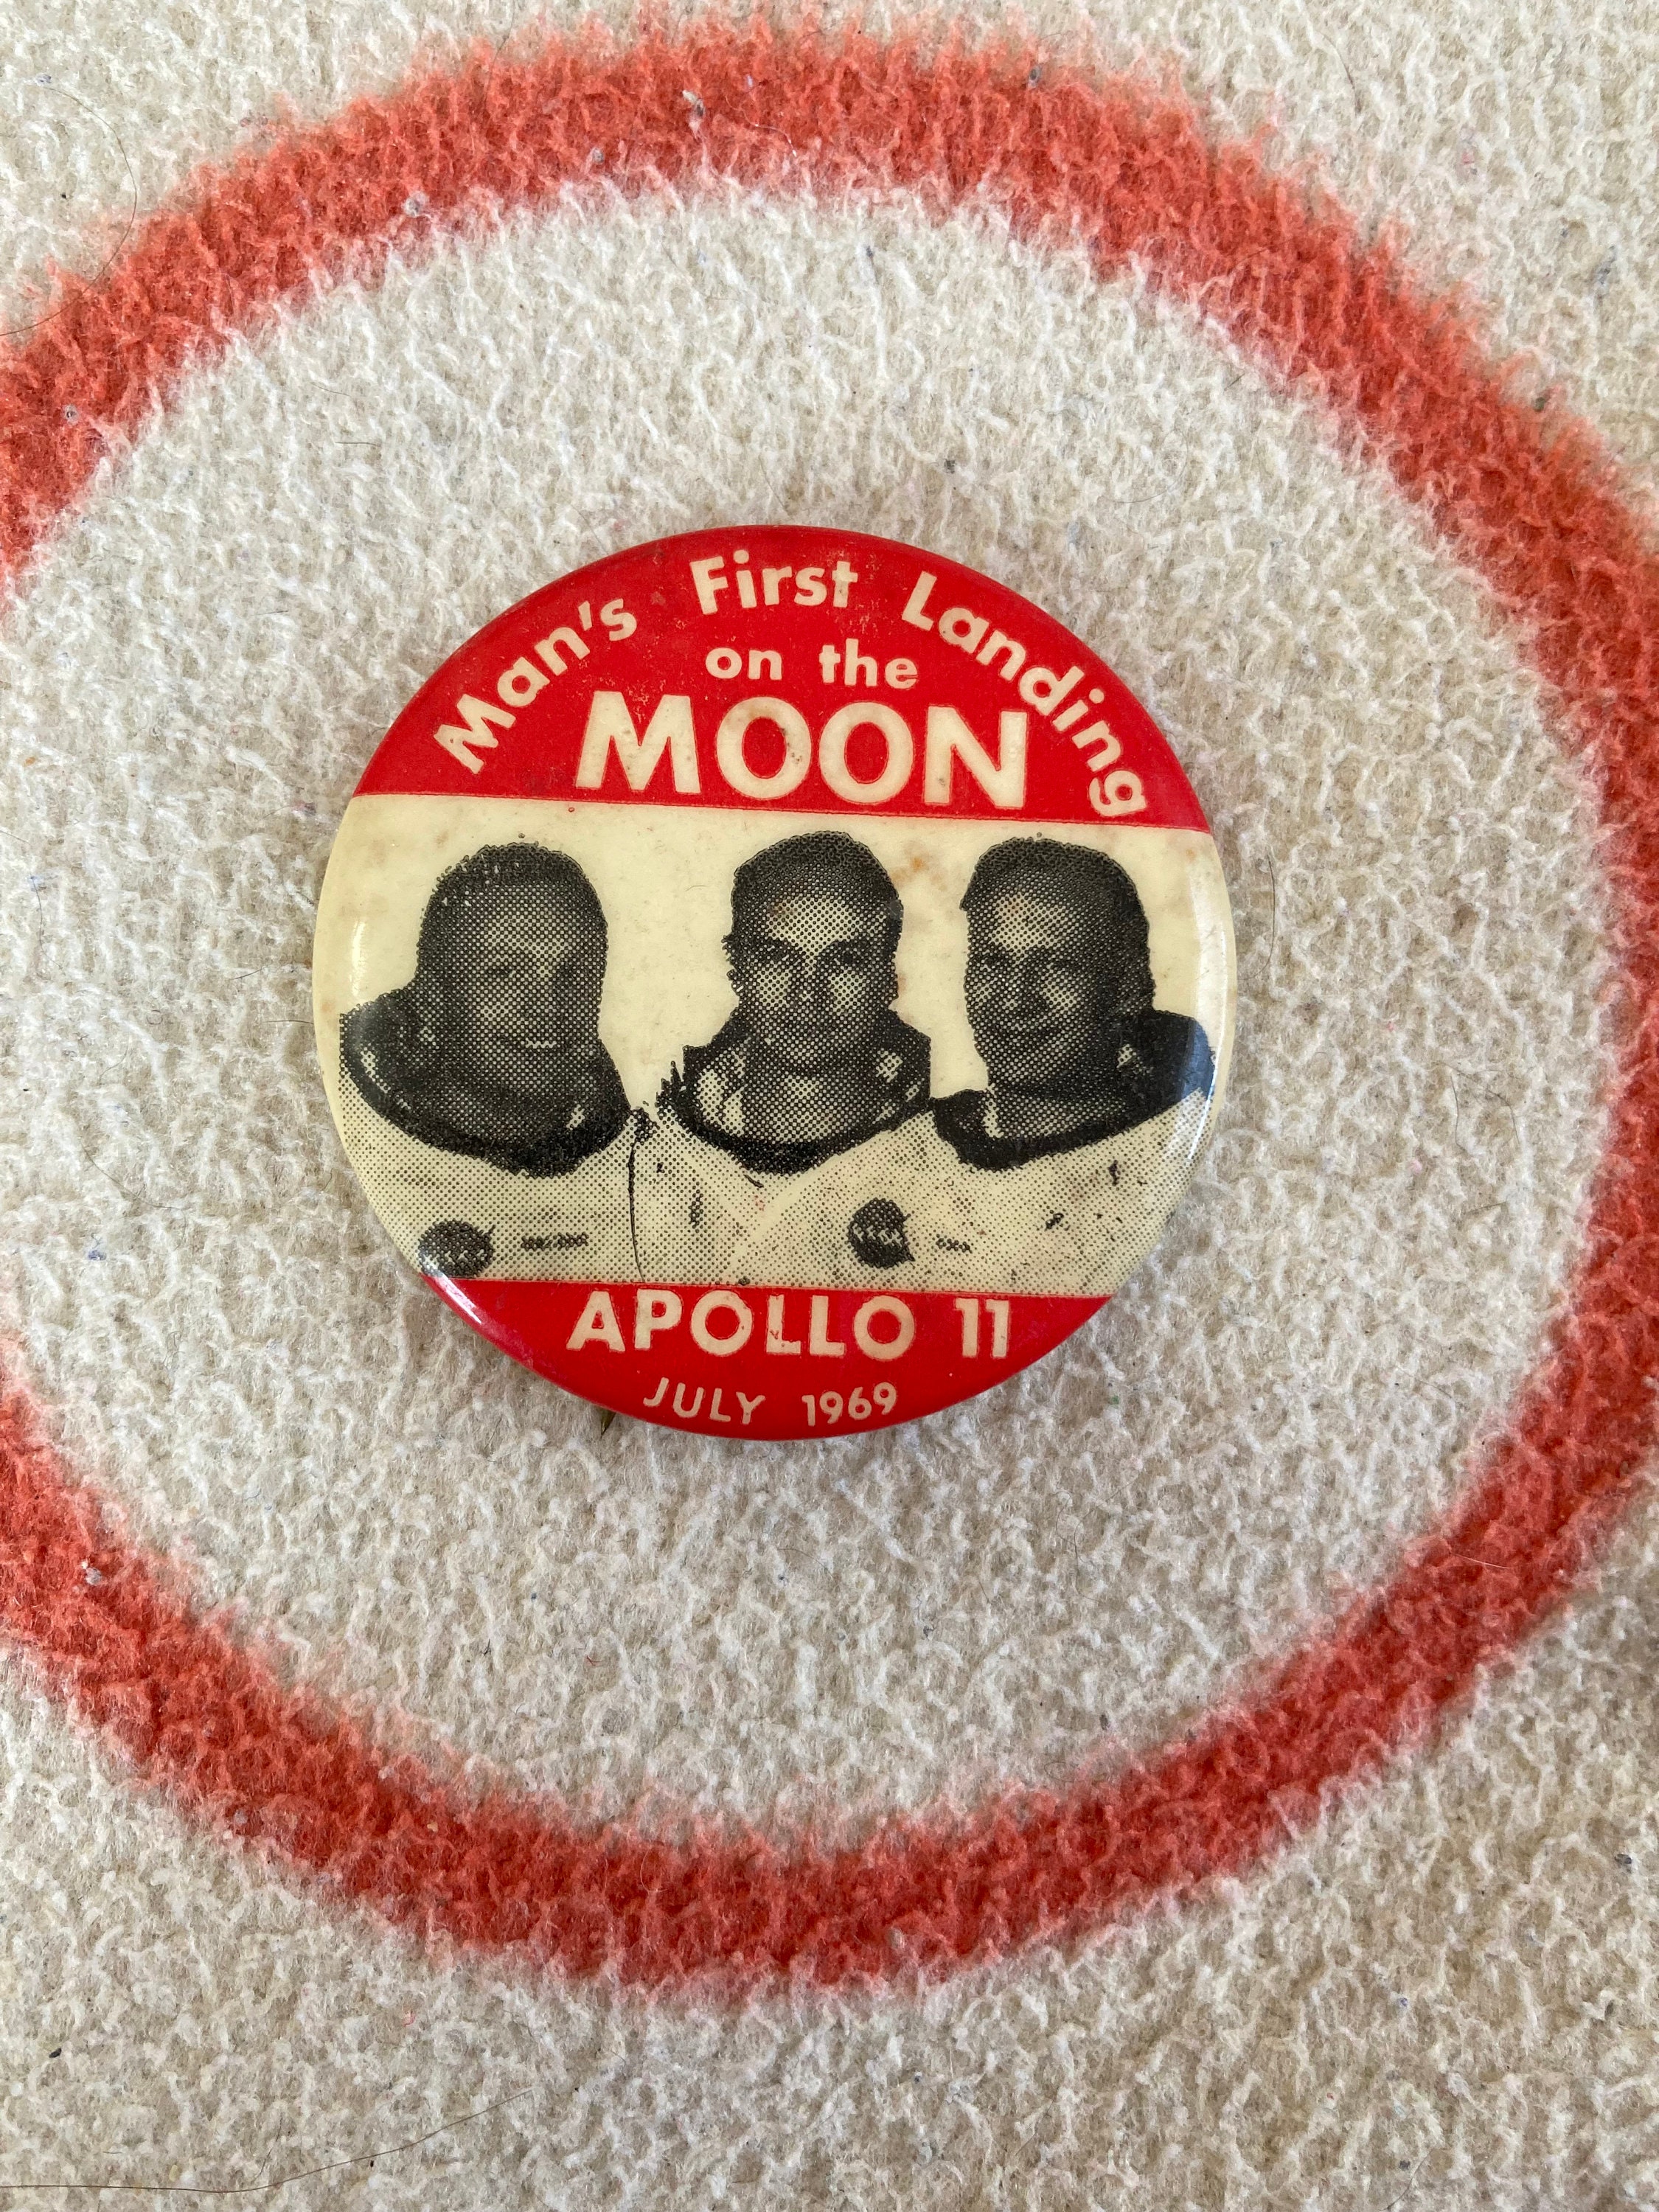 Pin on MOON MONT